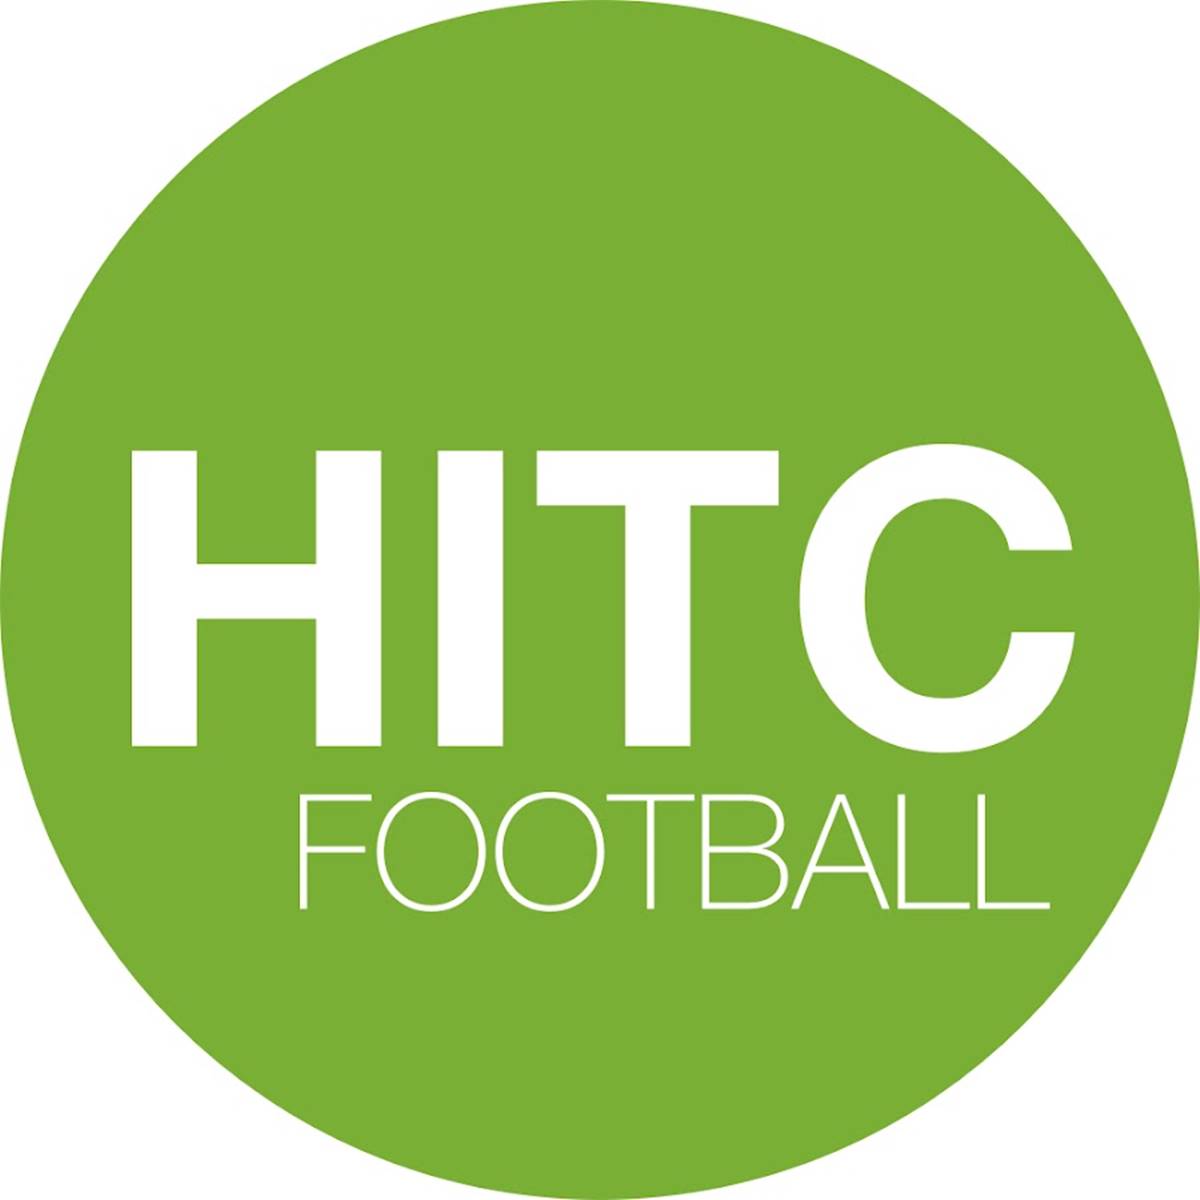 What Does HITC Mean For Football? (What Does HITC Sport stand for?)